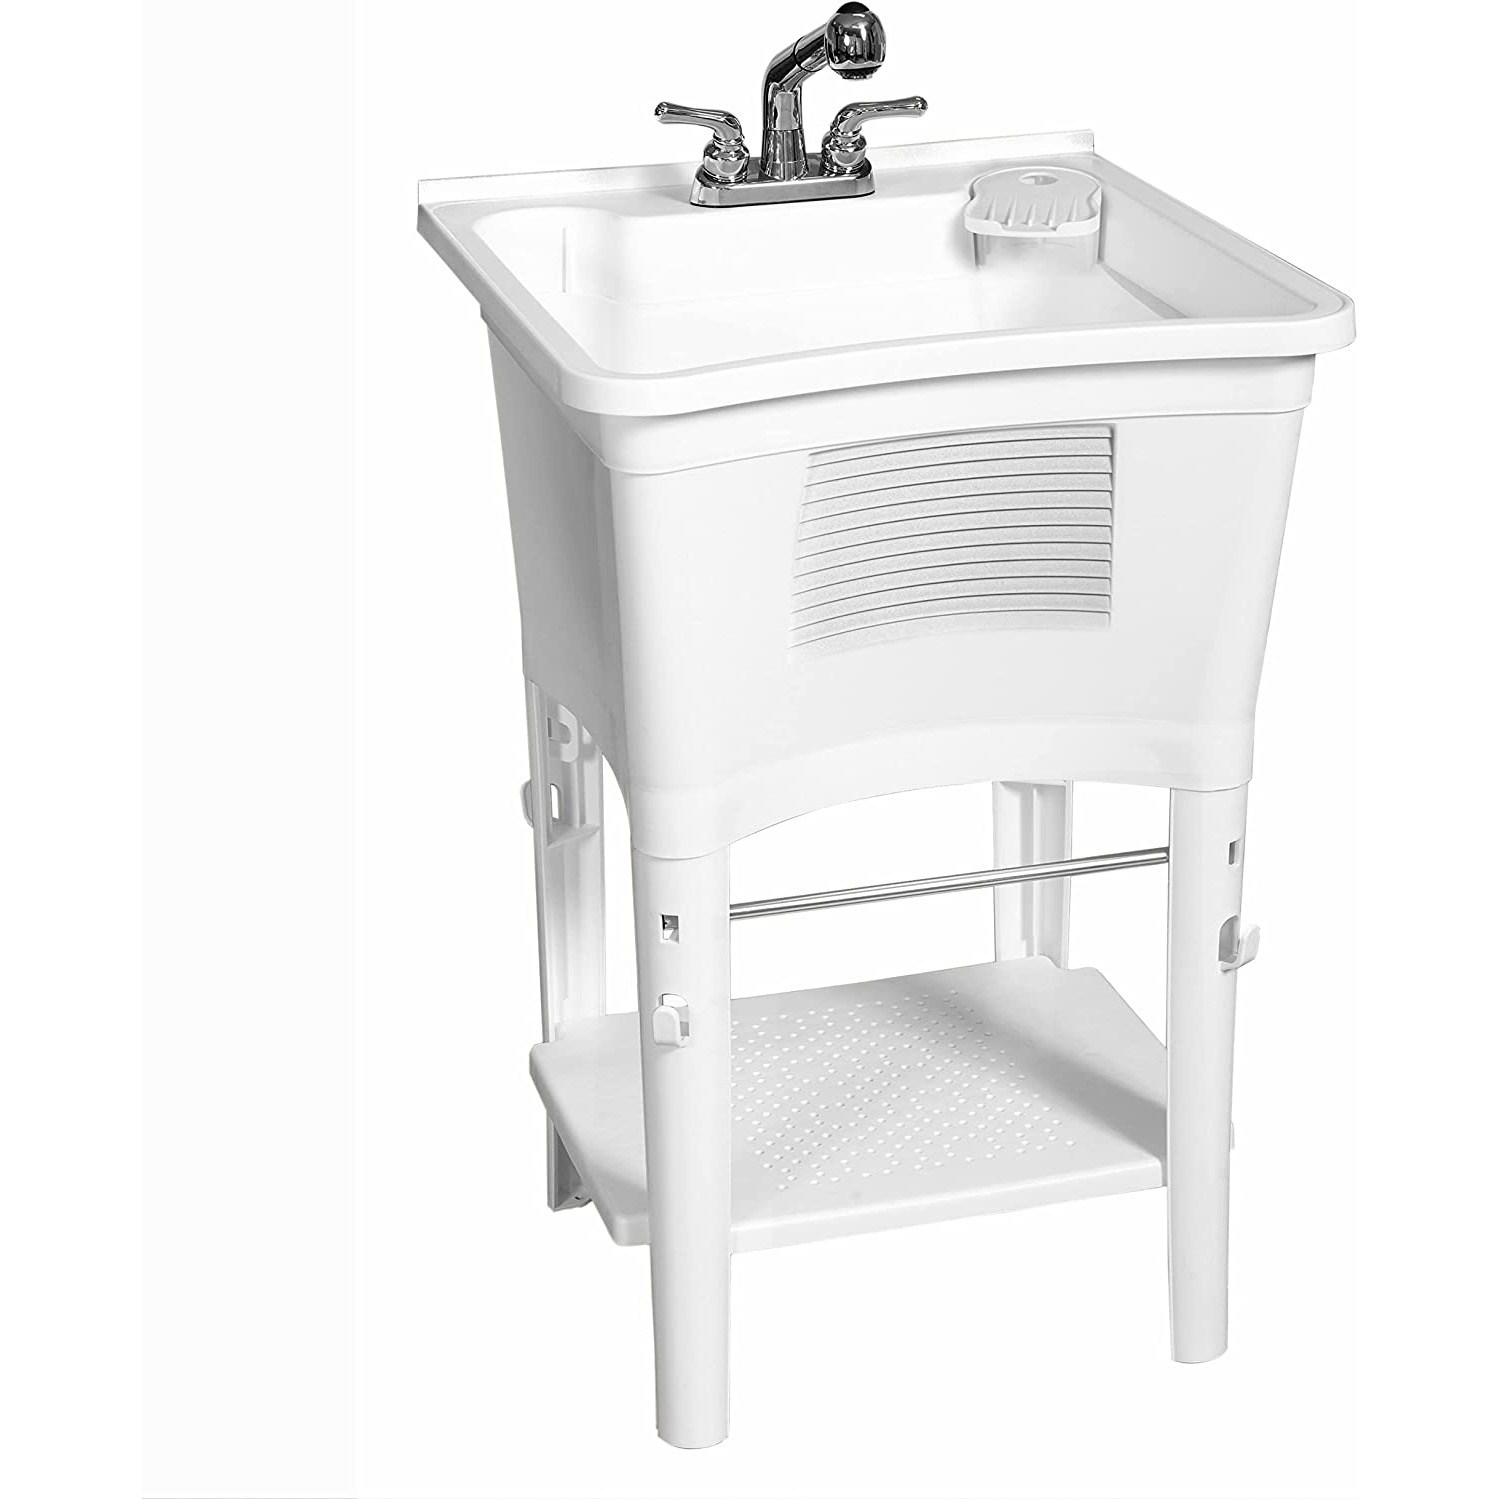 The Best Utility Sinks For Your Laundry Room — TruBuild Construction